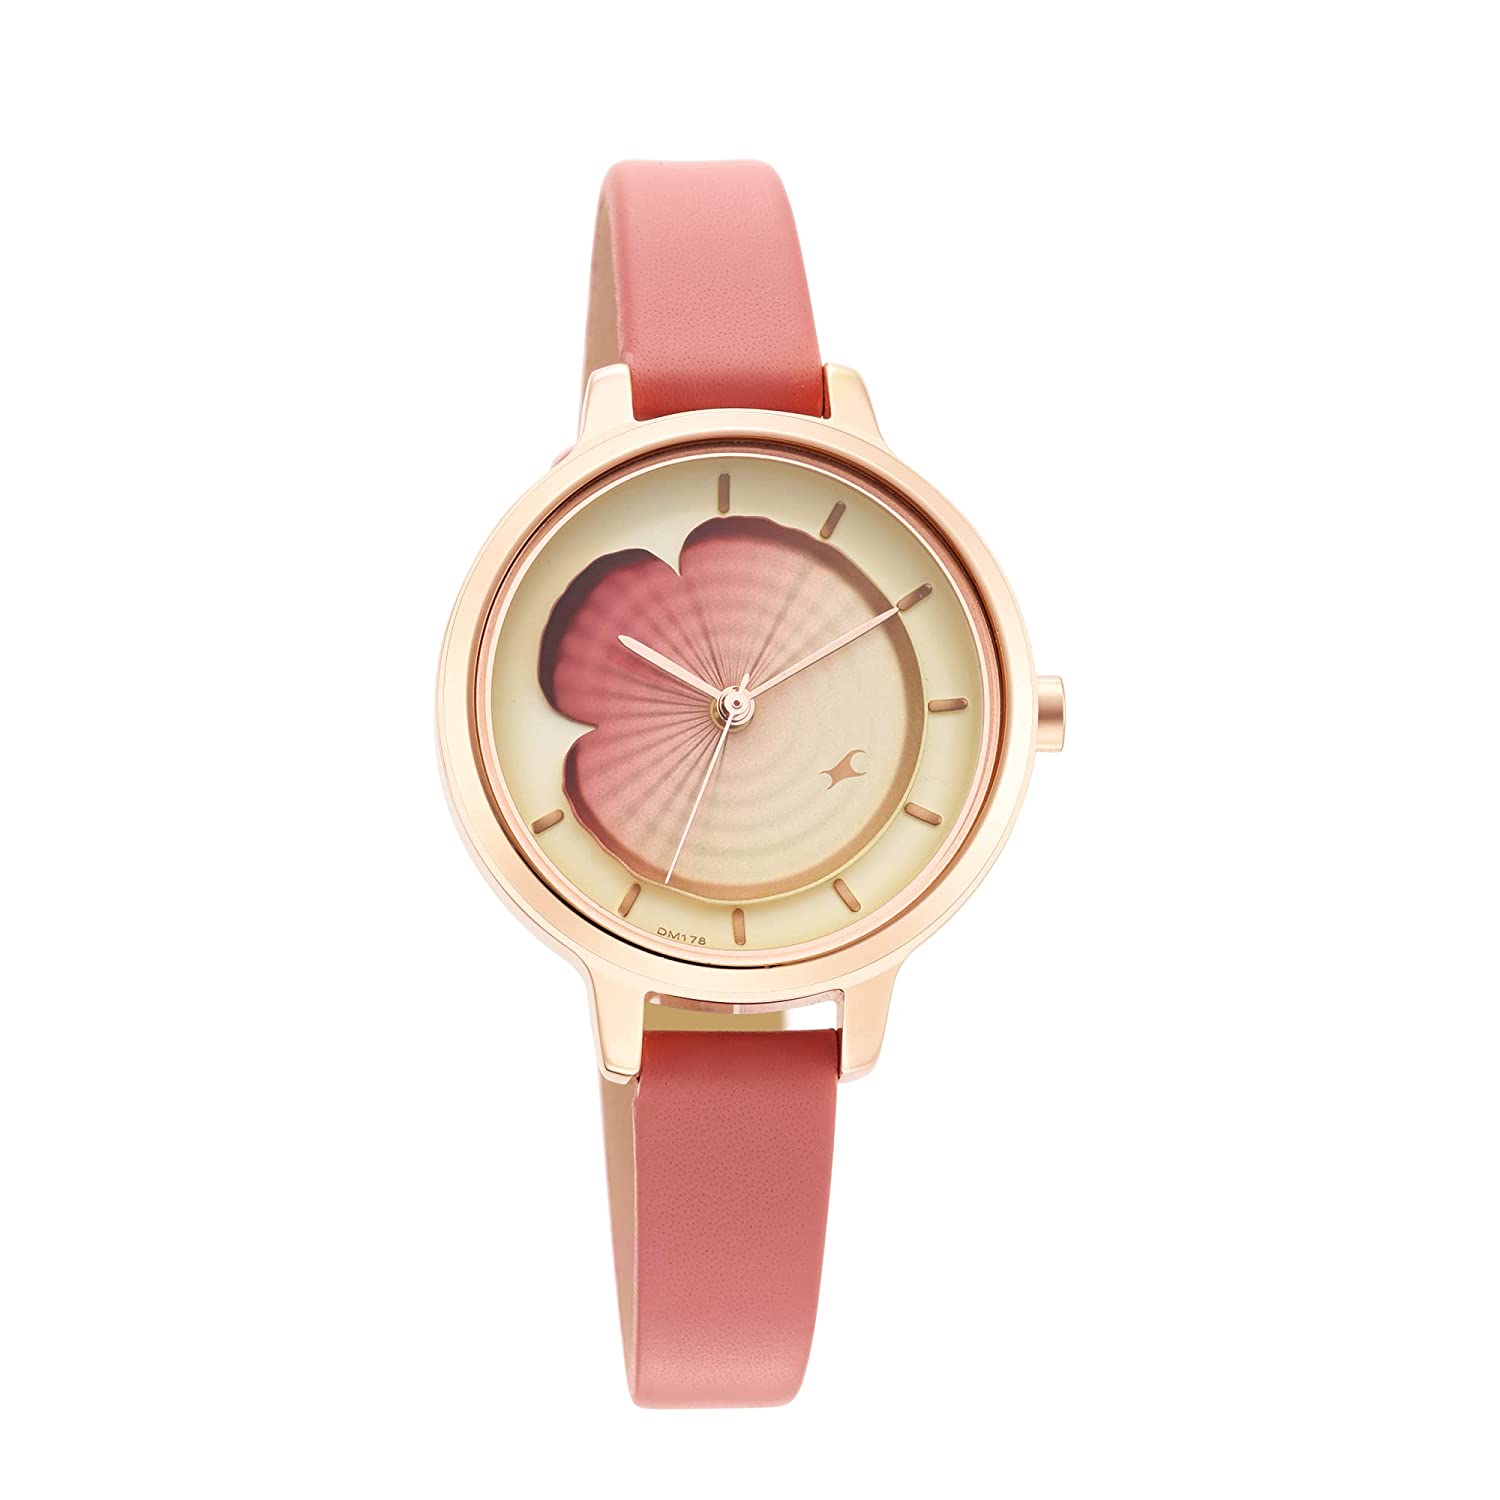 Fastrack Analog Red Dial Women's Watch 6264WL01